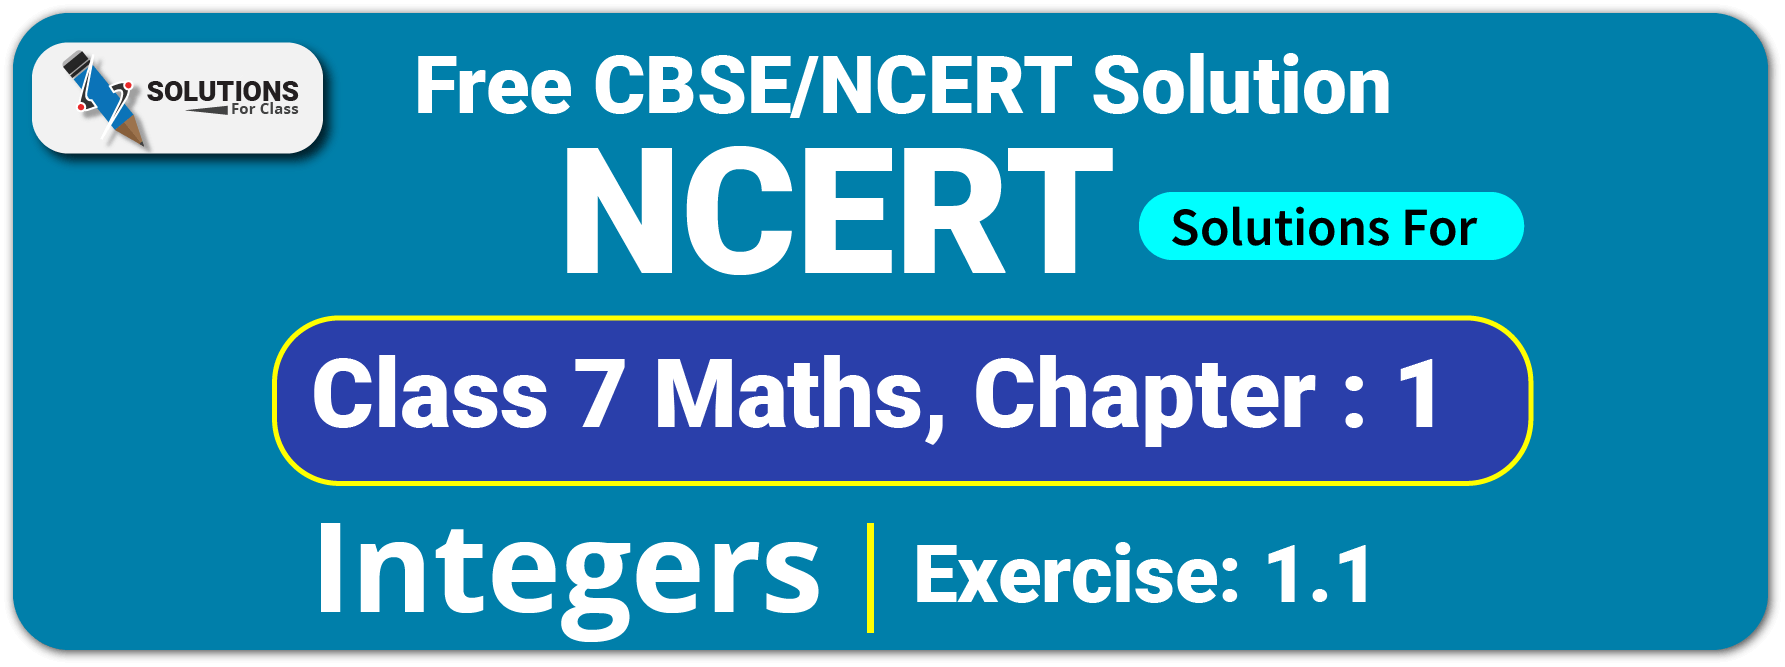 NCERT Solutions For Class 7 Chapter 1, Integers , Exercise 1.1